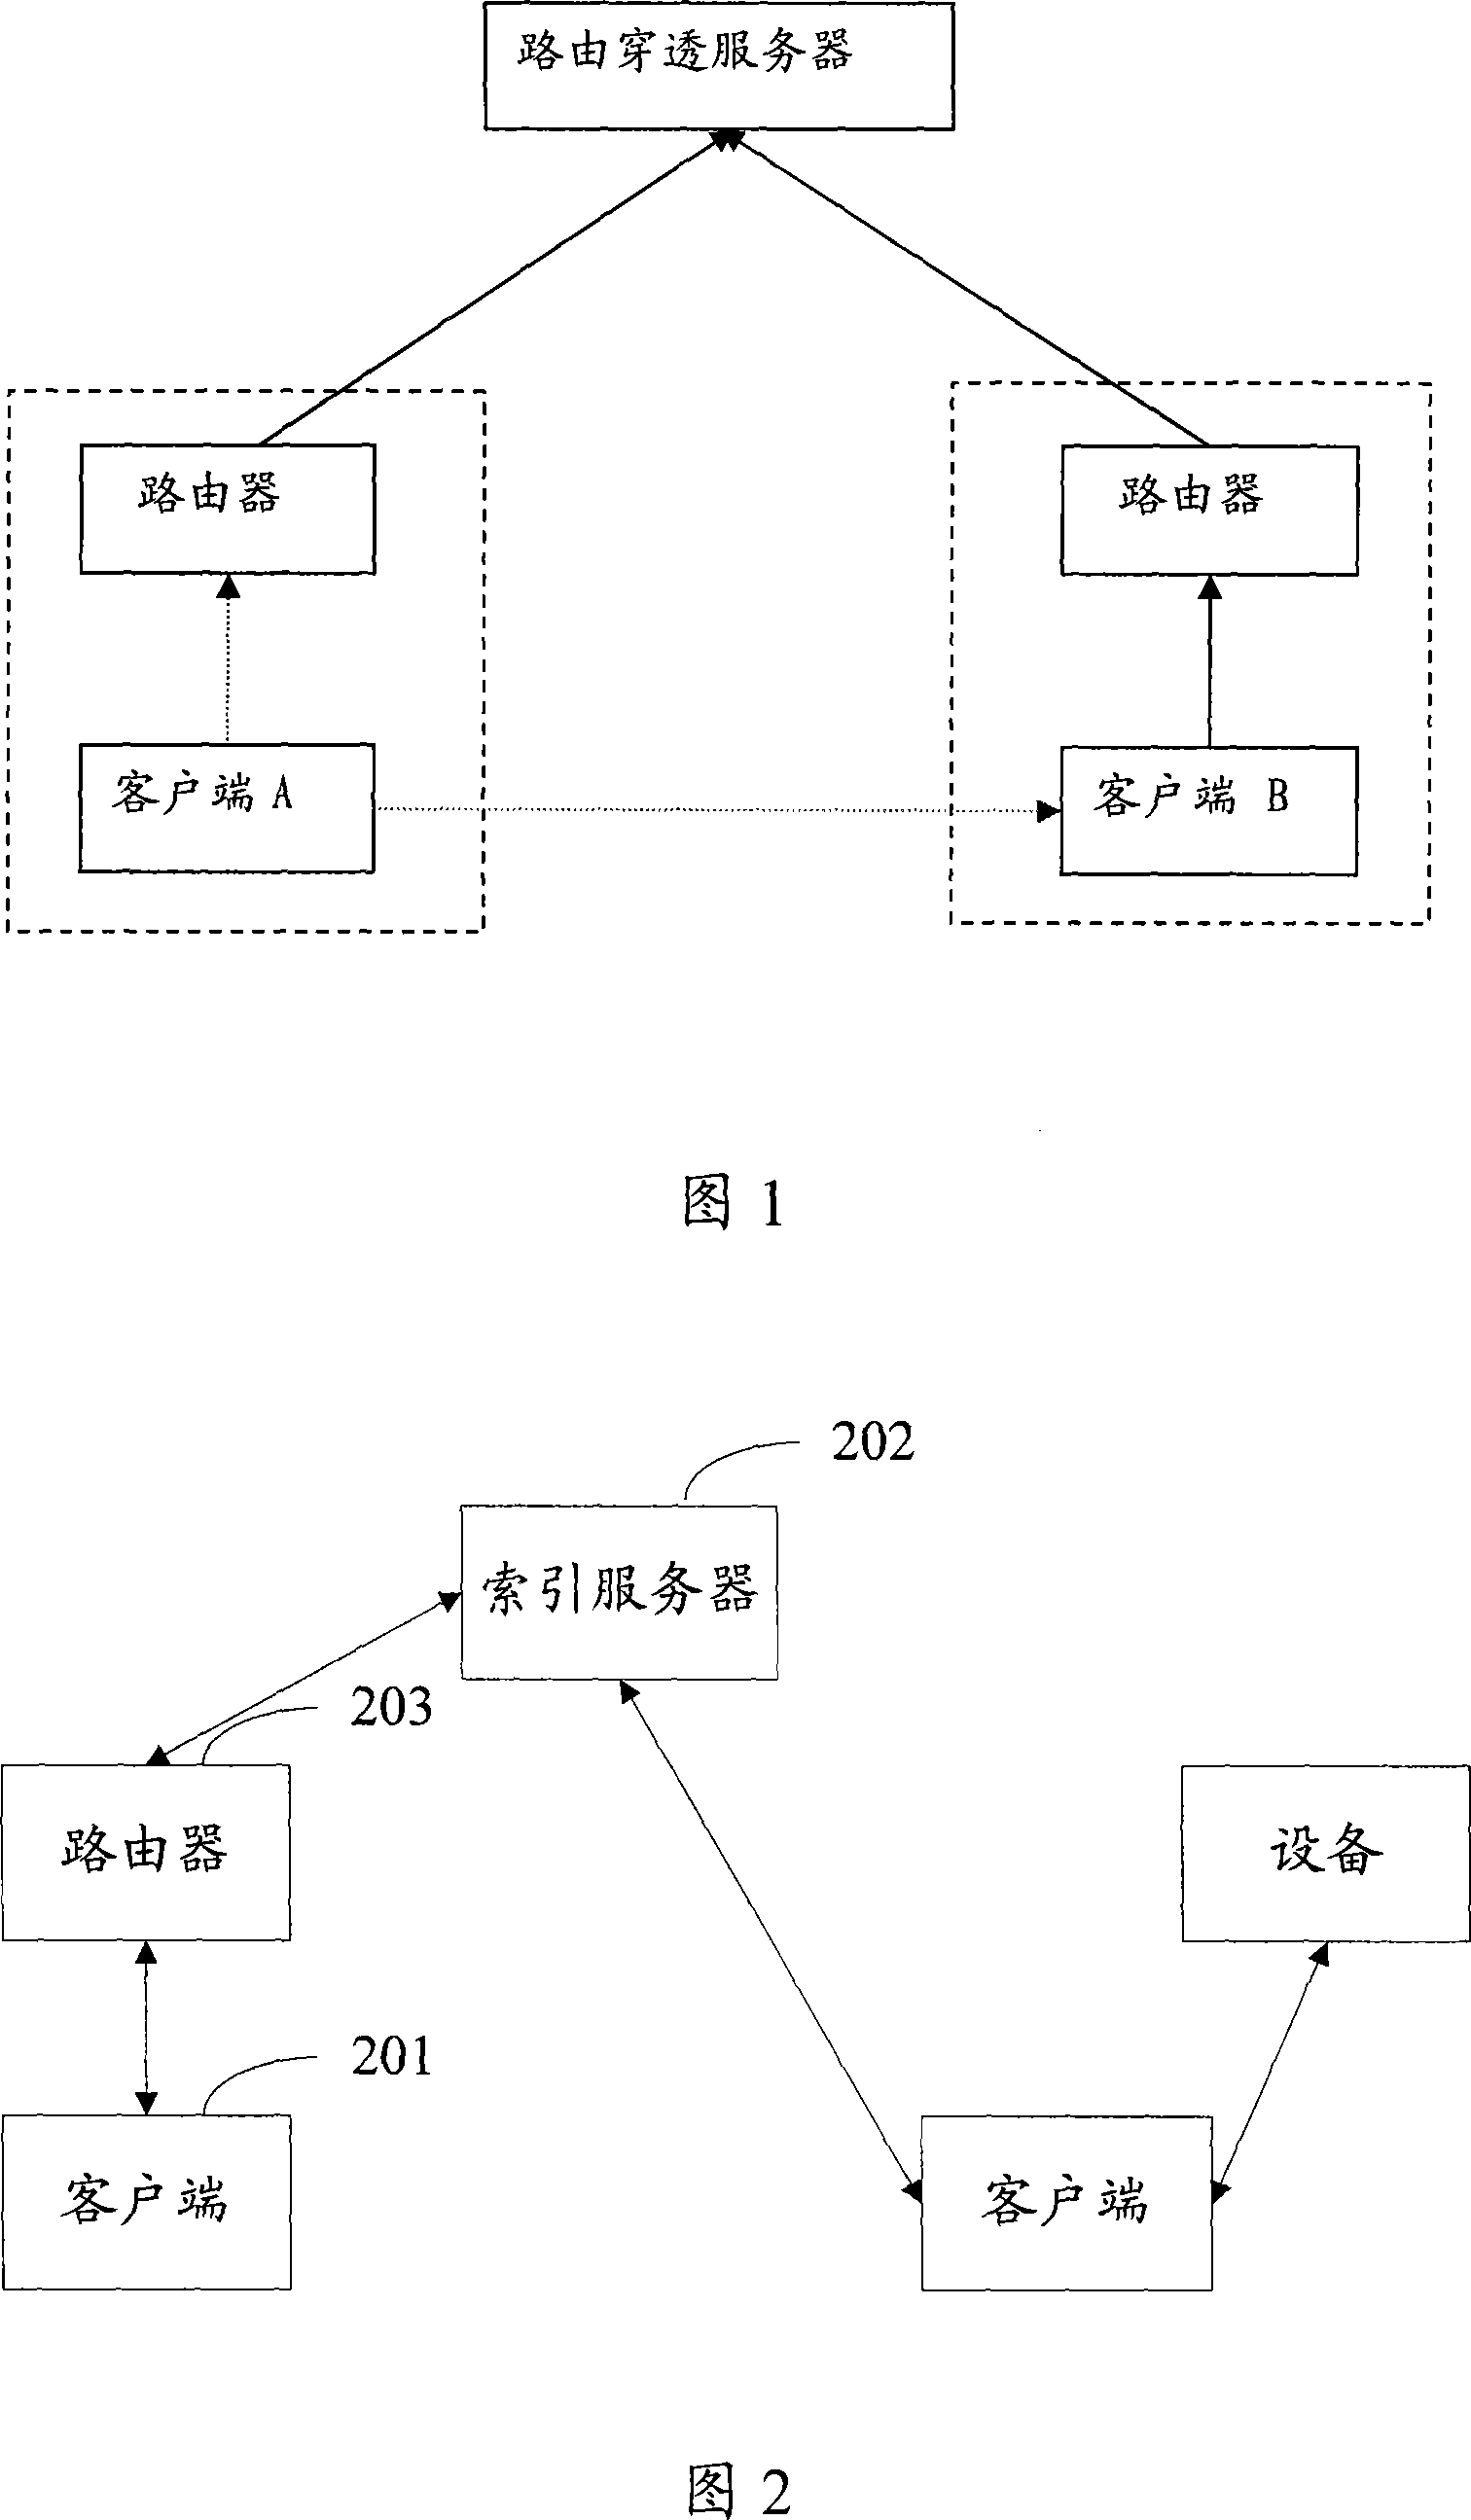 A method and system for transmitting data between clients